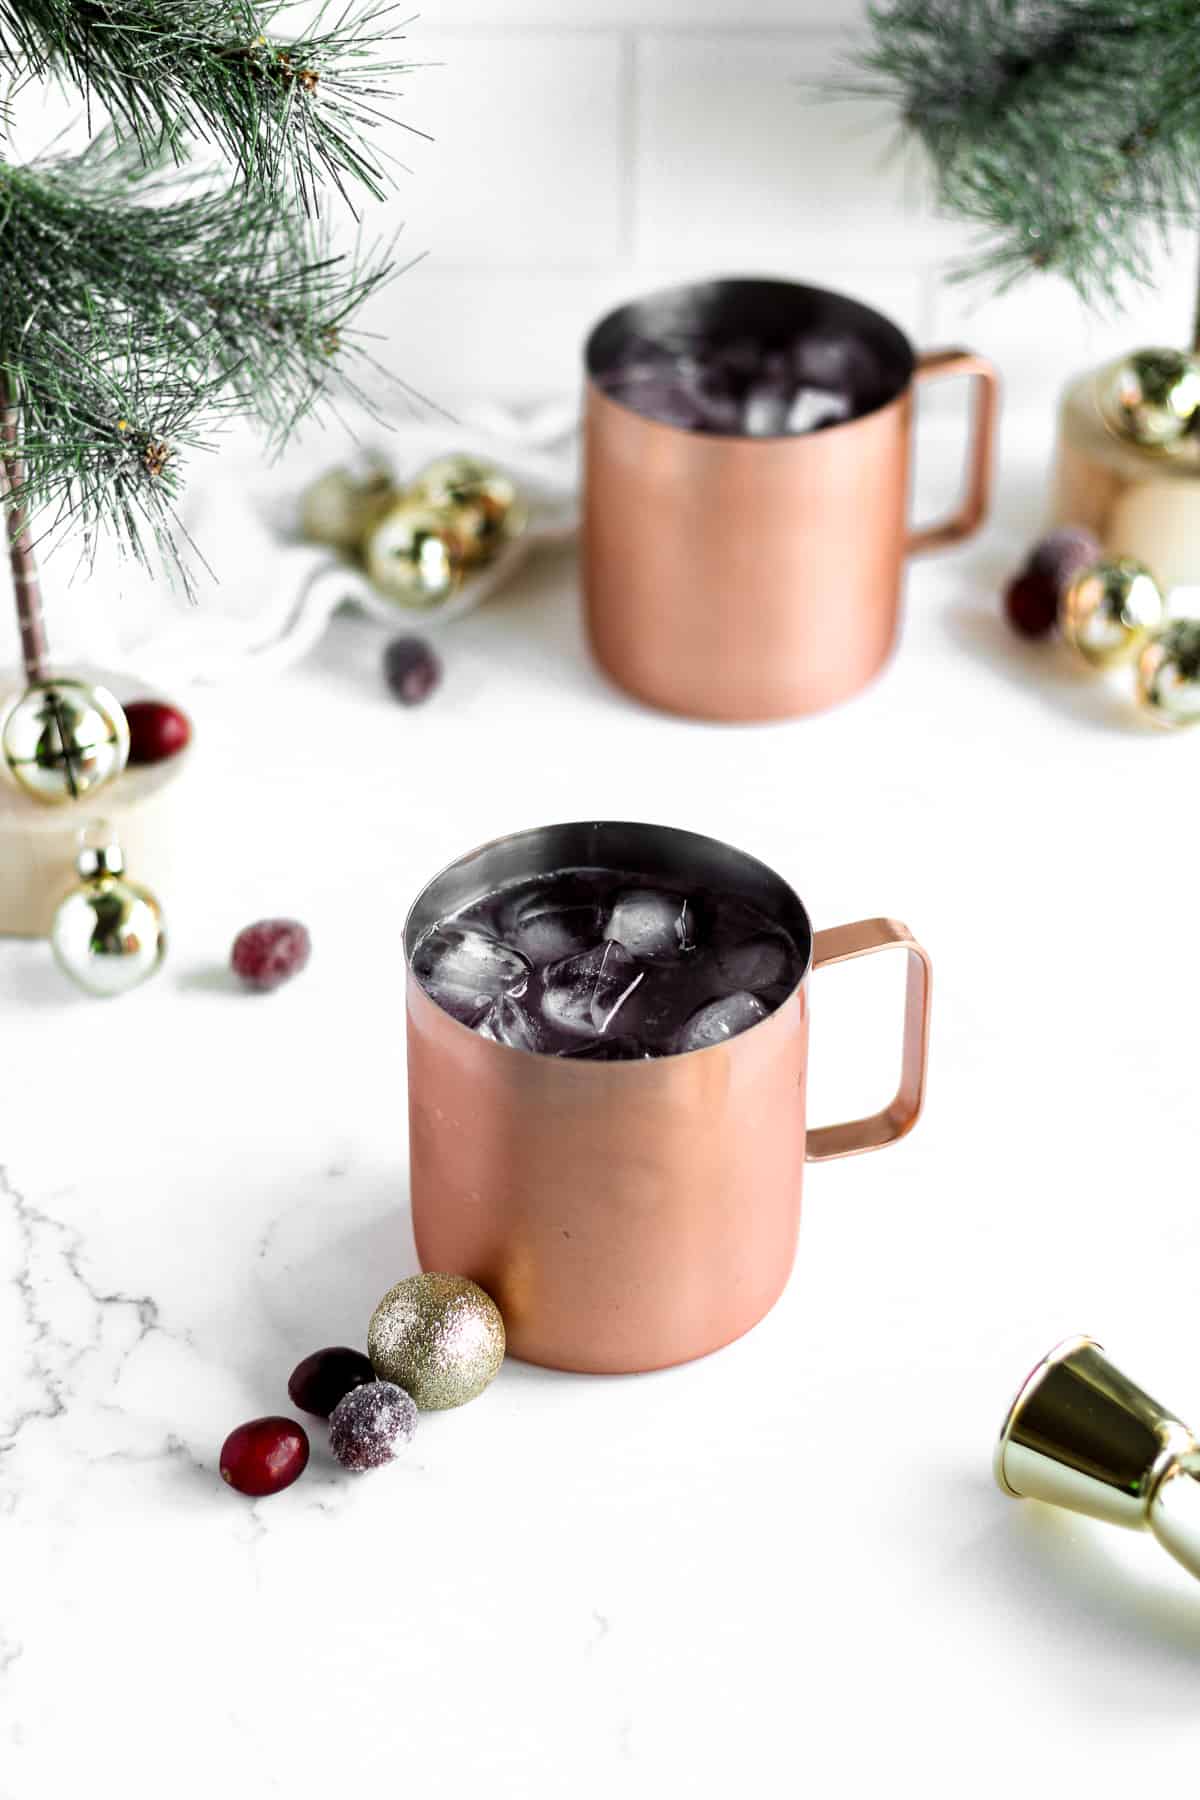 Cocktail poured into copper mug filled with ice.